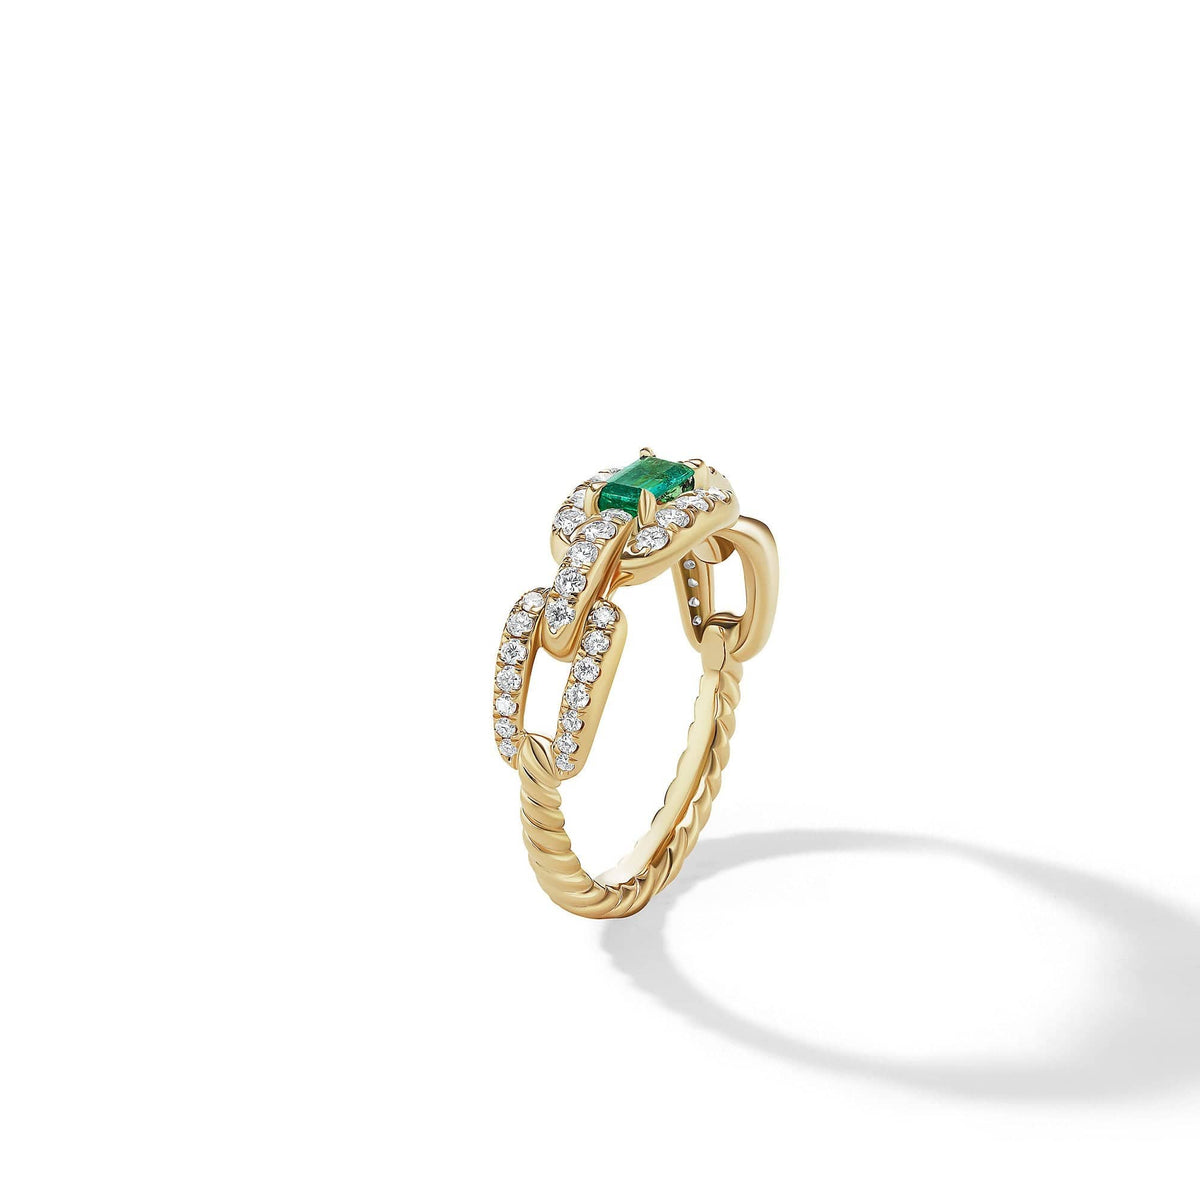 Stax Chain Link Ring in 18K Yellow Gold with Pavé Diamonds and Emerald